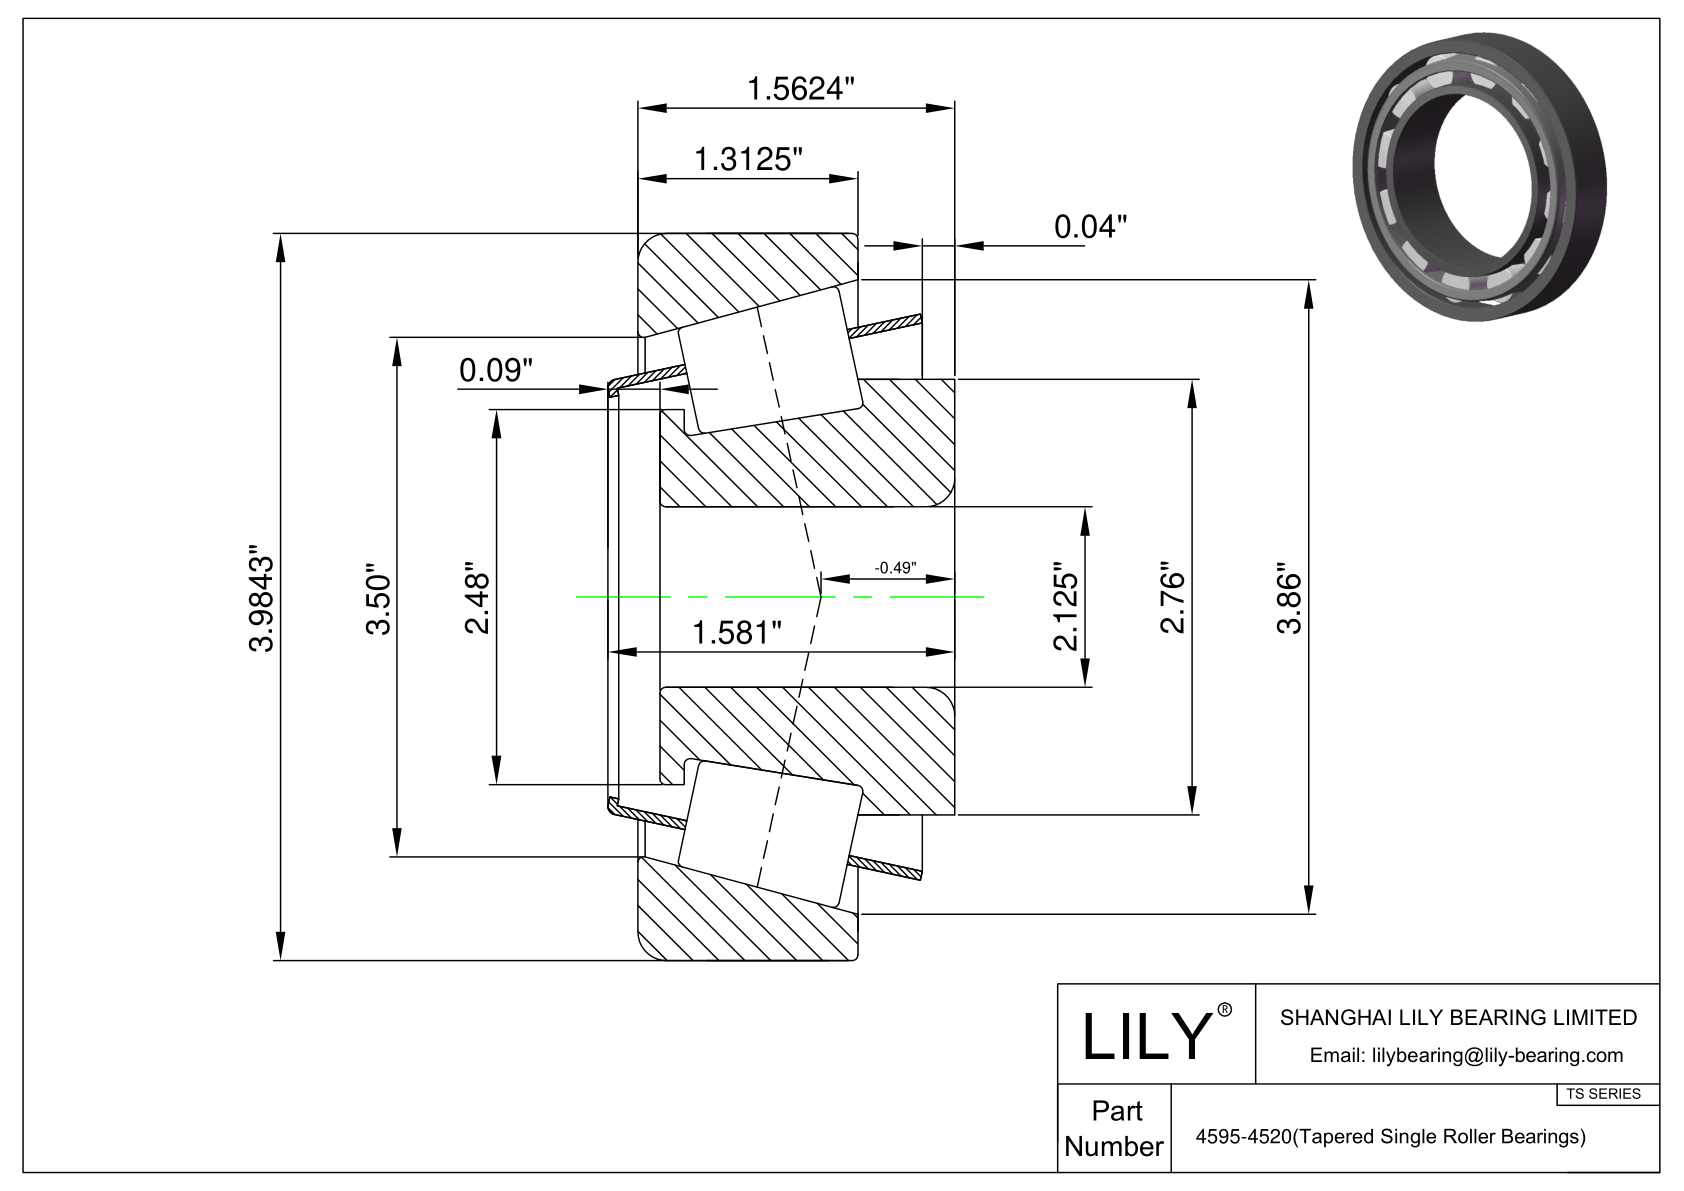 4595-4520 TS (Tapered Single Roller Bearings) (Imperial) cad drawing